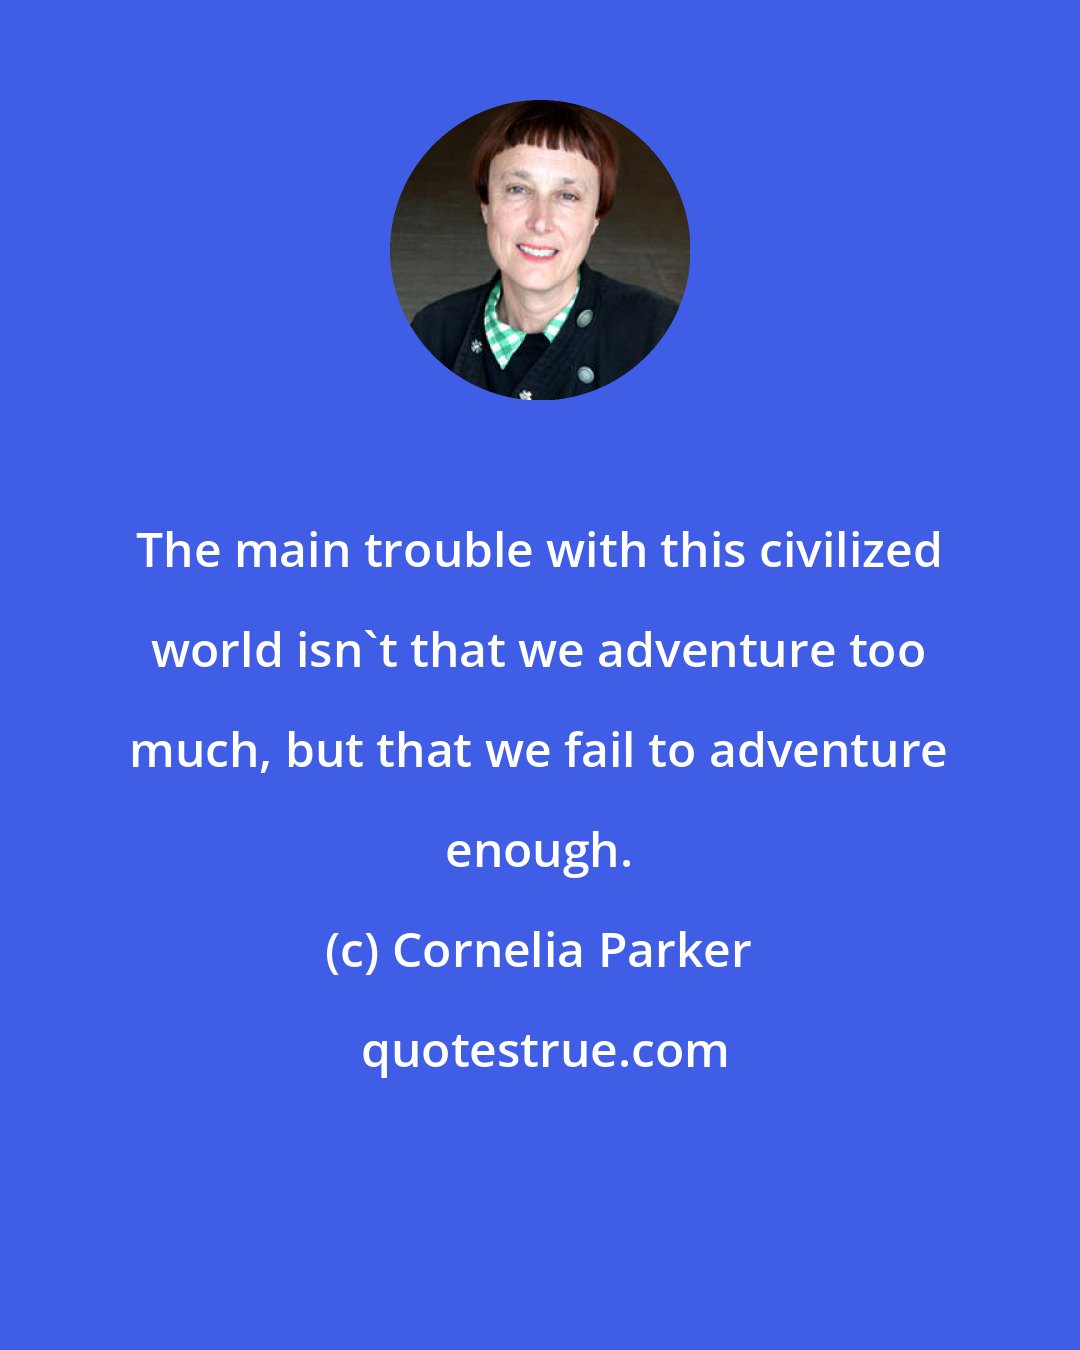 Cornelia Parker: The main trouble with this civilized world isn't that we adventure too much, but that we fail to adventure enough.